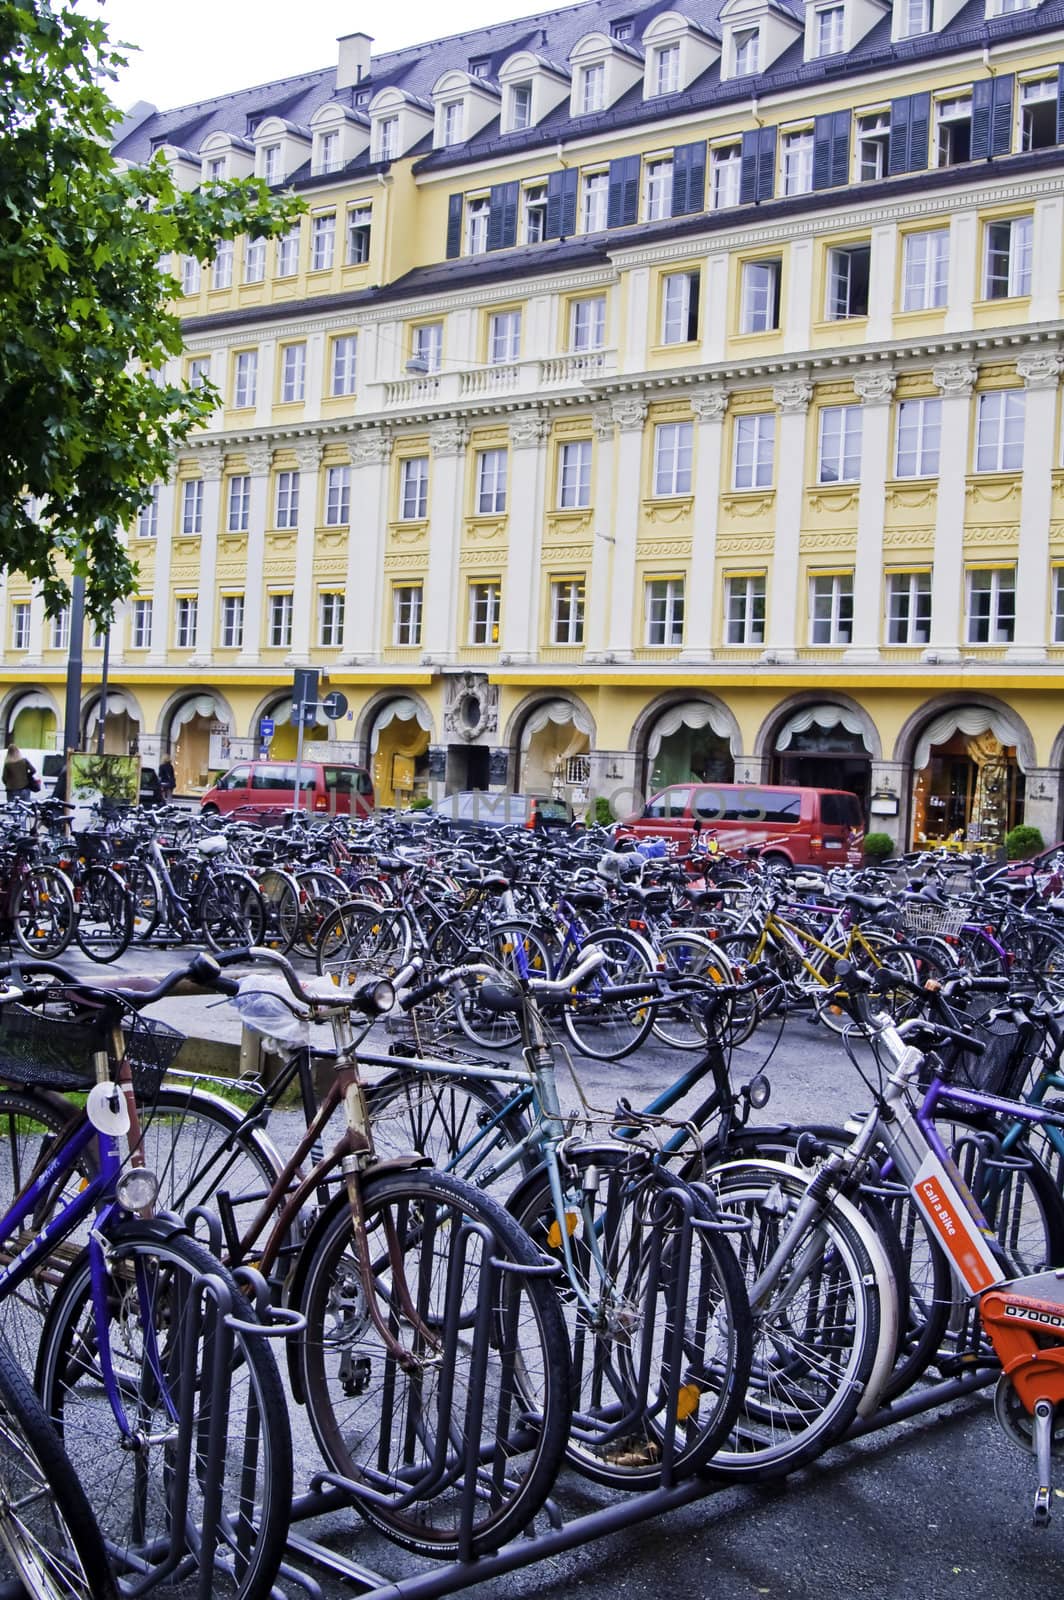 Many Bicycles parked in front of a building in Munich, Germany